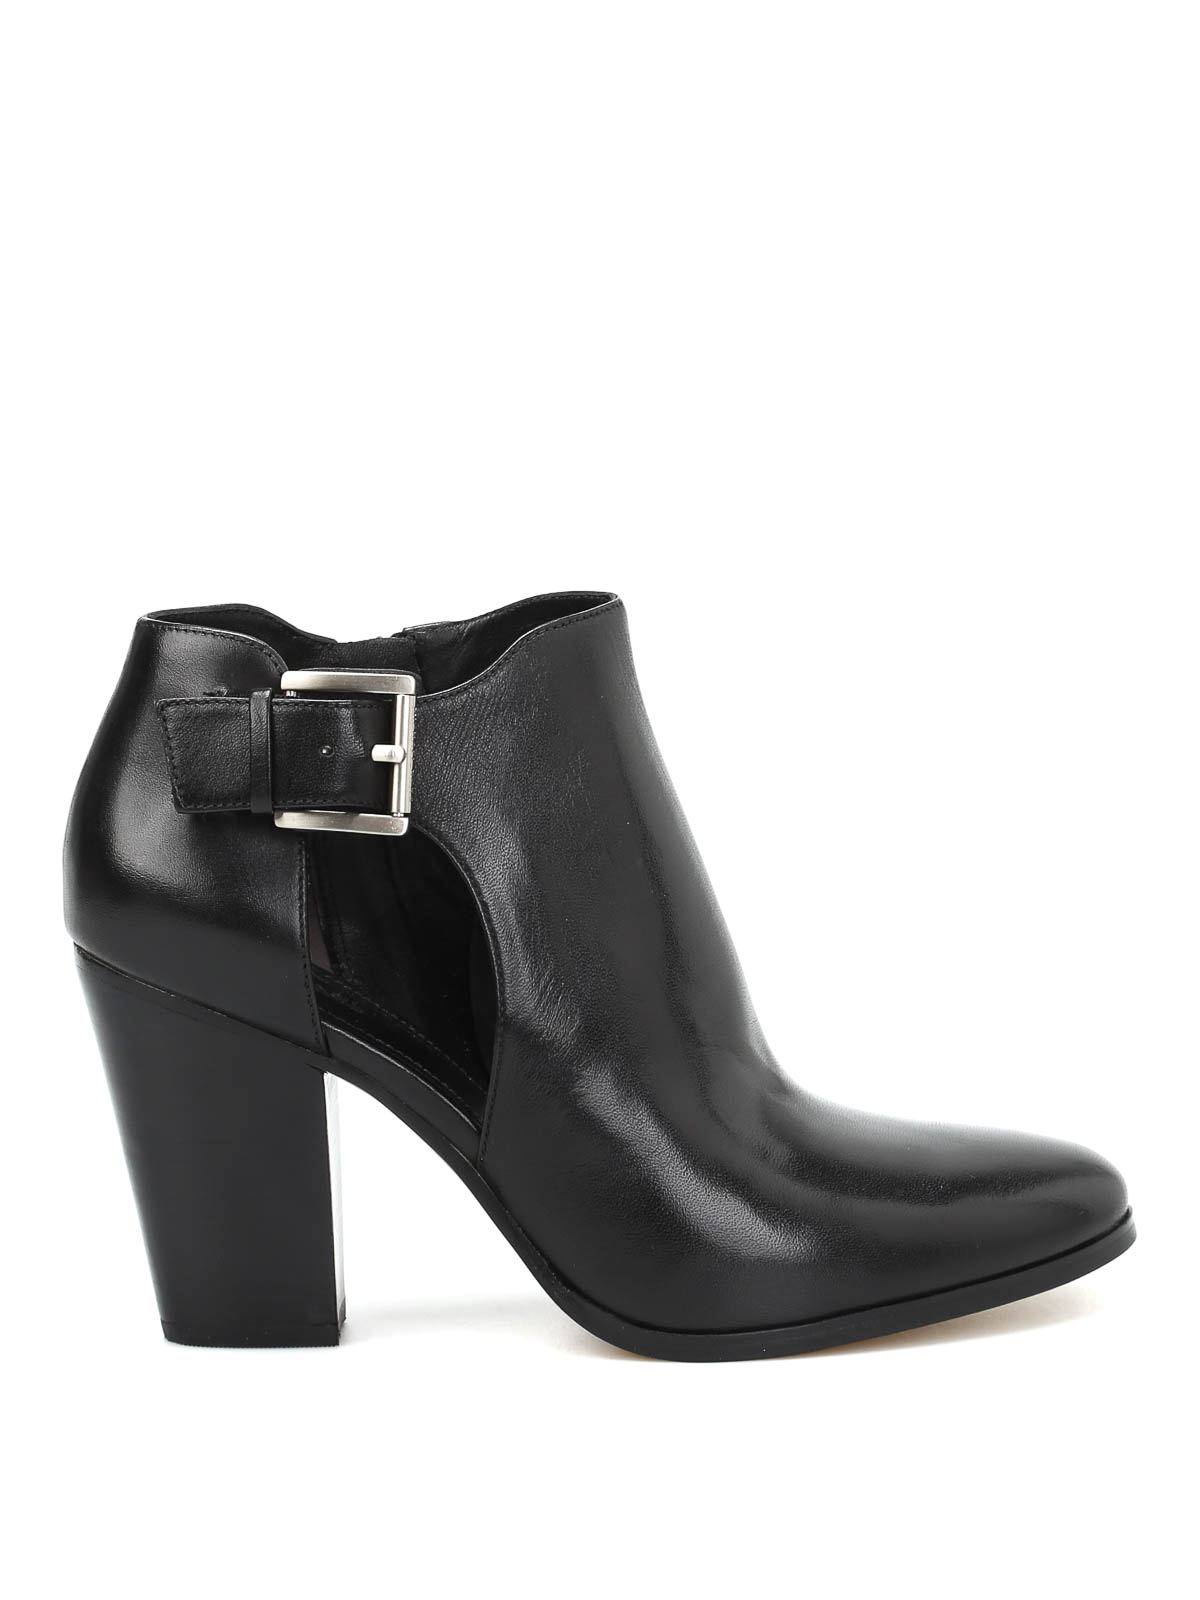 Ankle boots Michael Kors - Adams leather booties - 40T6ADHE5L001